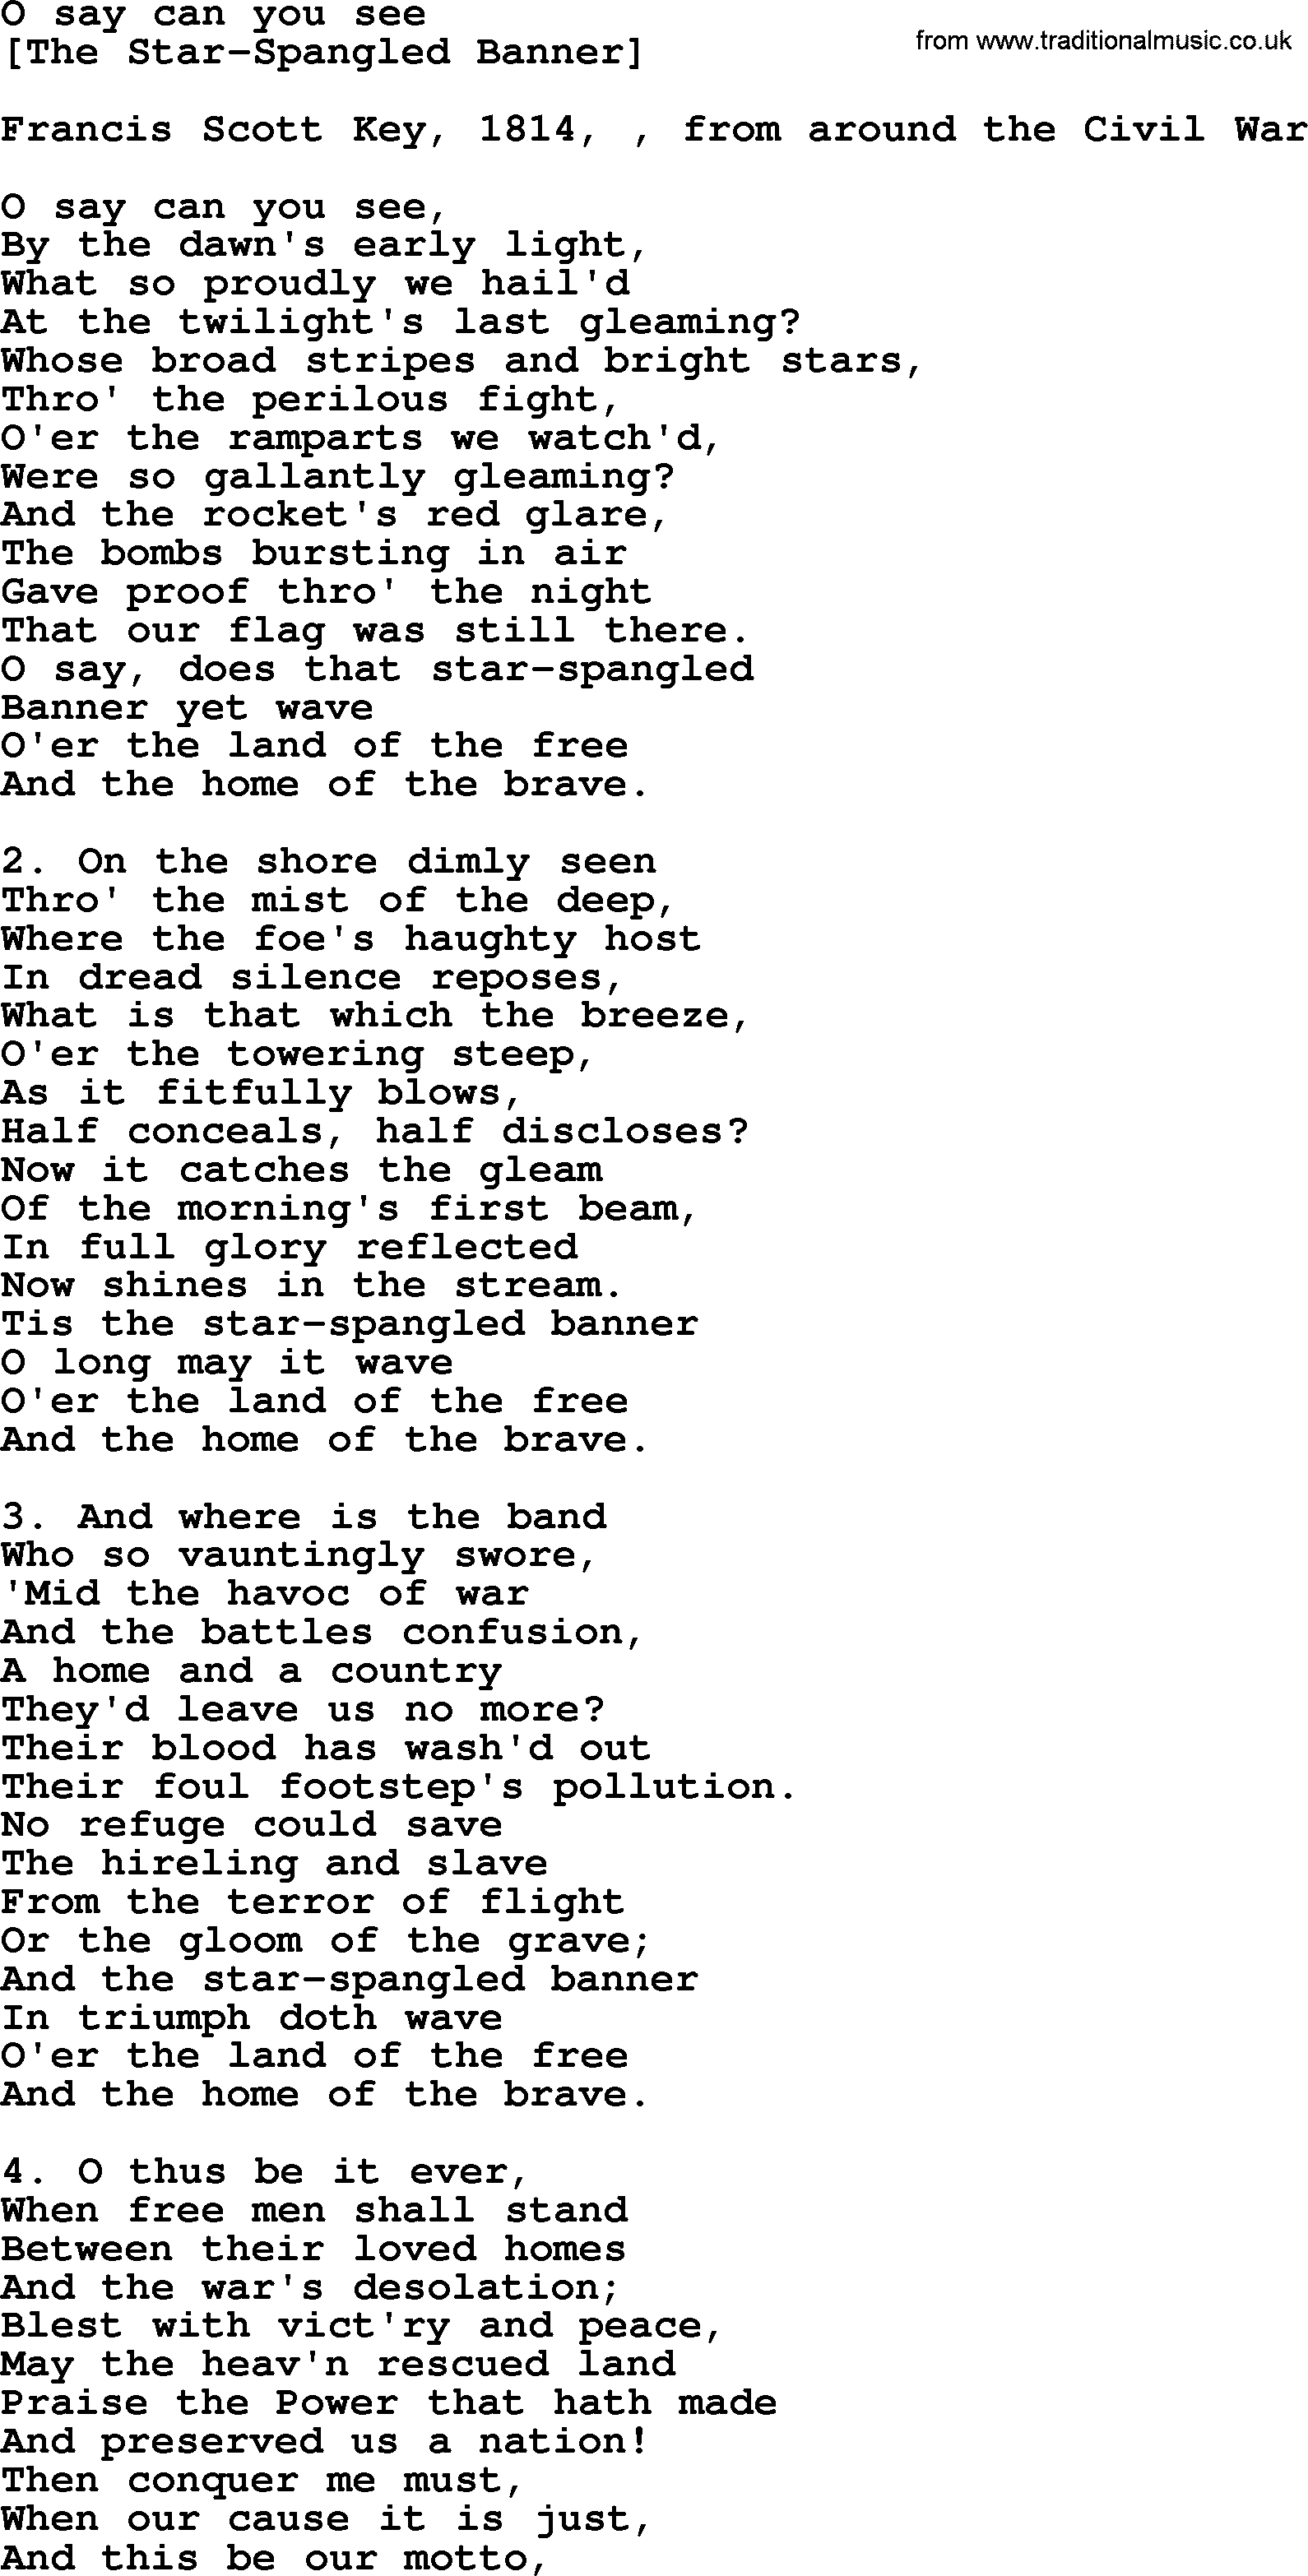 Old American Song Lyrics For O Say Can You See With Pdf